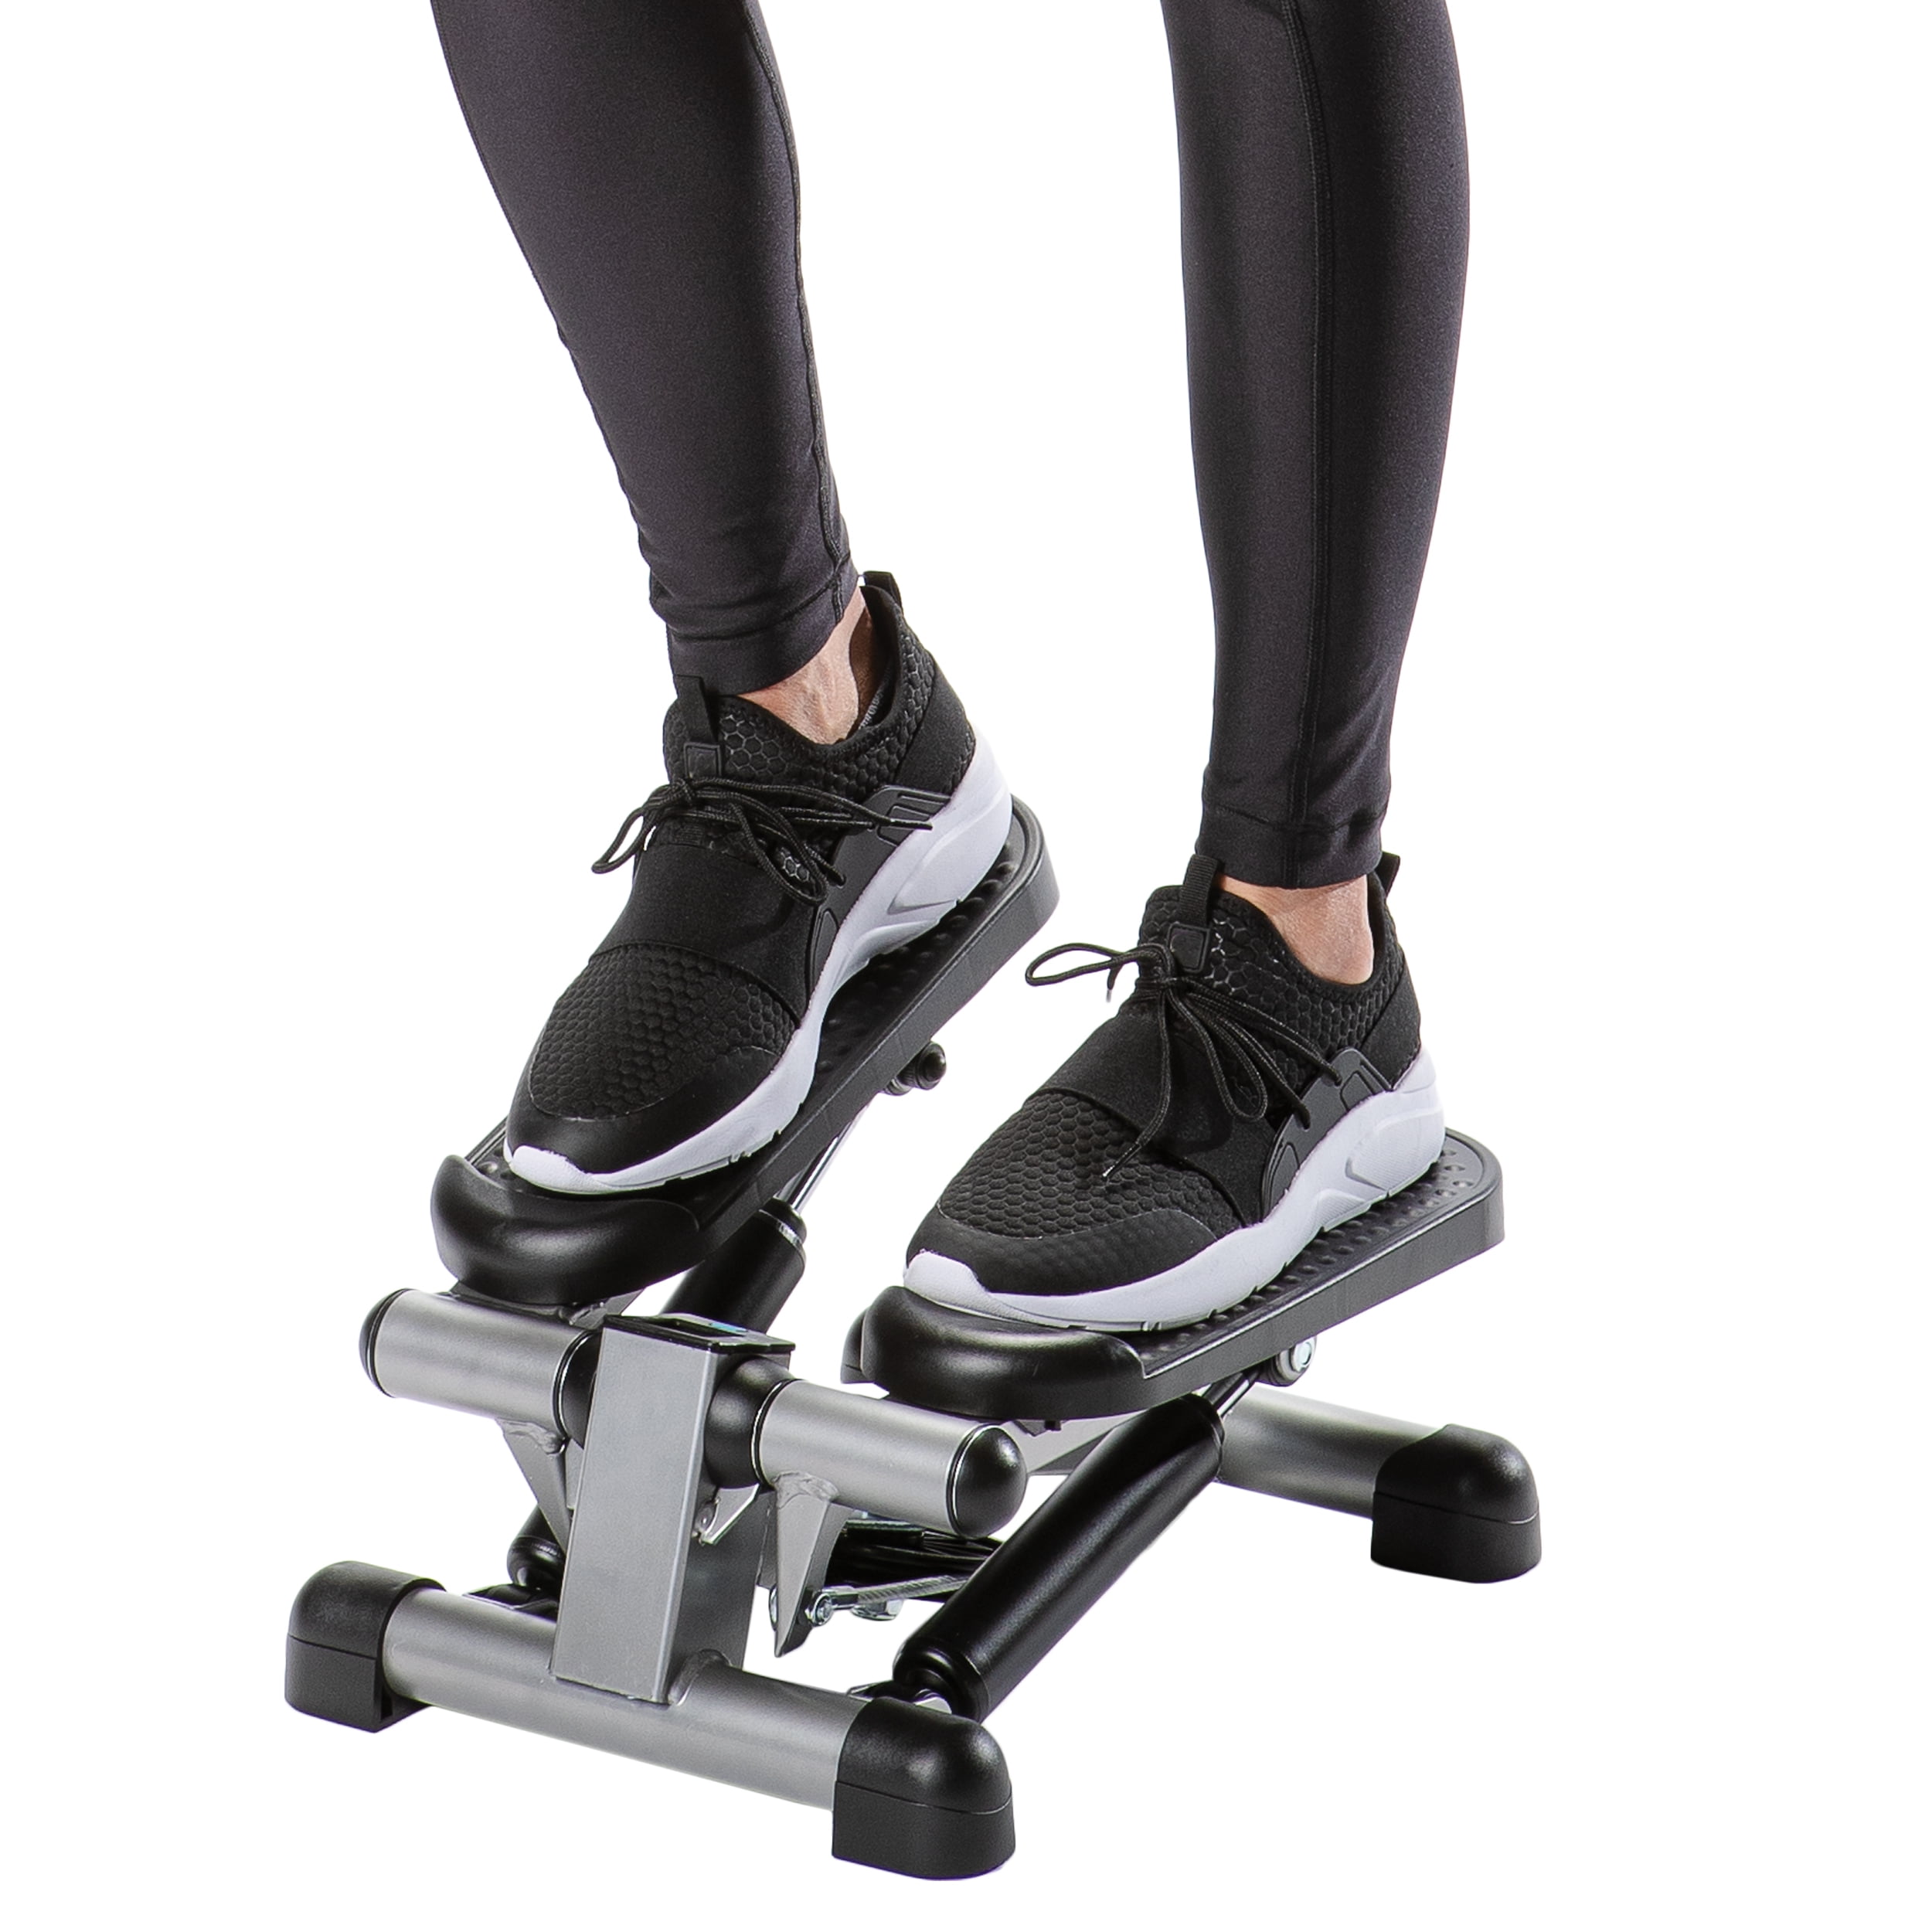 Stamina Mini Stepper with Monitor - Low Impact Black and Gray Stepper- Great Design for at Home Workouts - Step Machines - 3